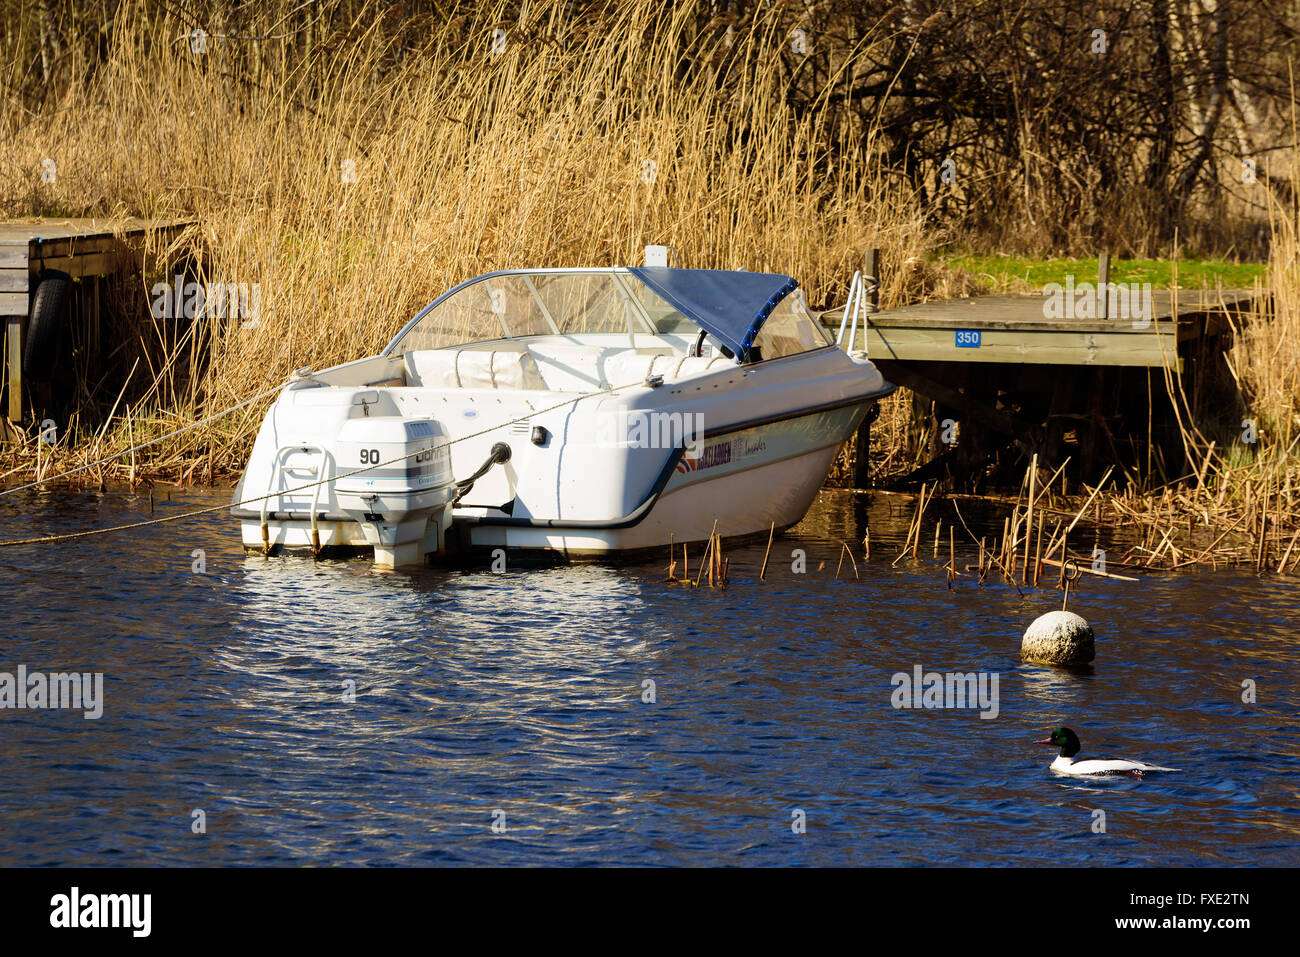 Lyckeby, Sweden - April 7, 2016: White Askeladden 515 open motorboat with Johnson 90 motor, moored at a wooden jetty seen from t Stock Photo